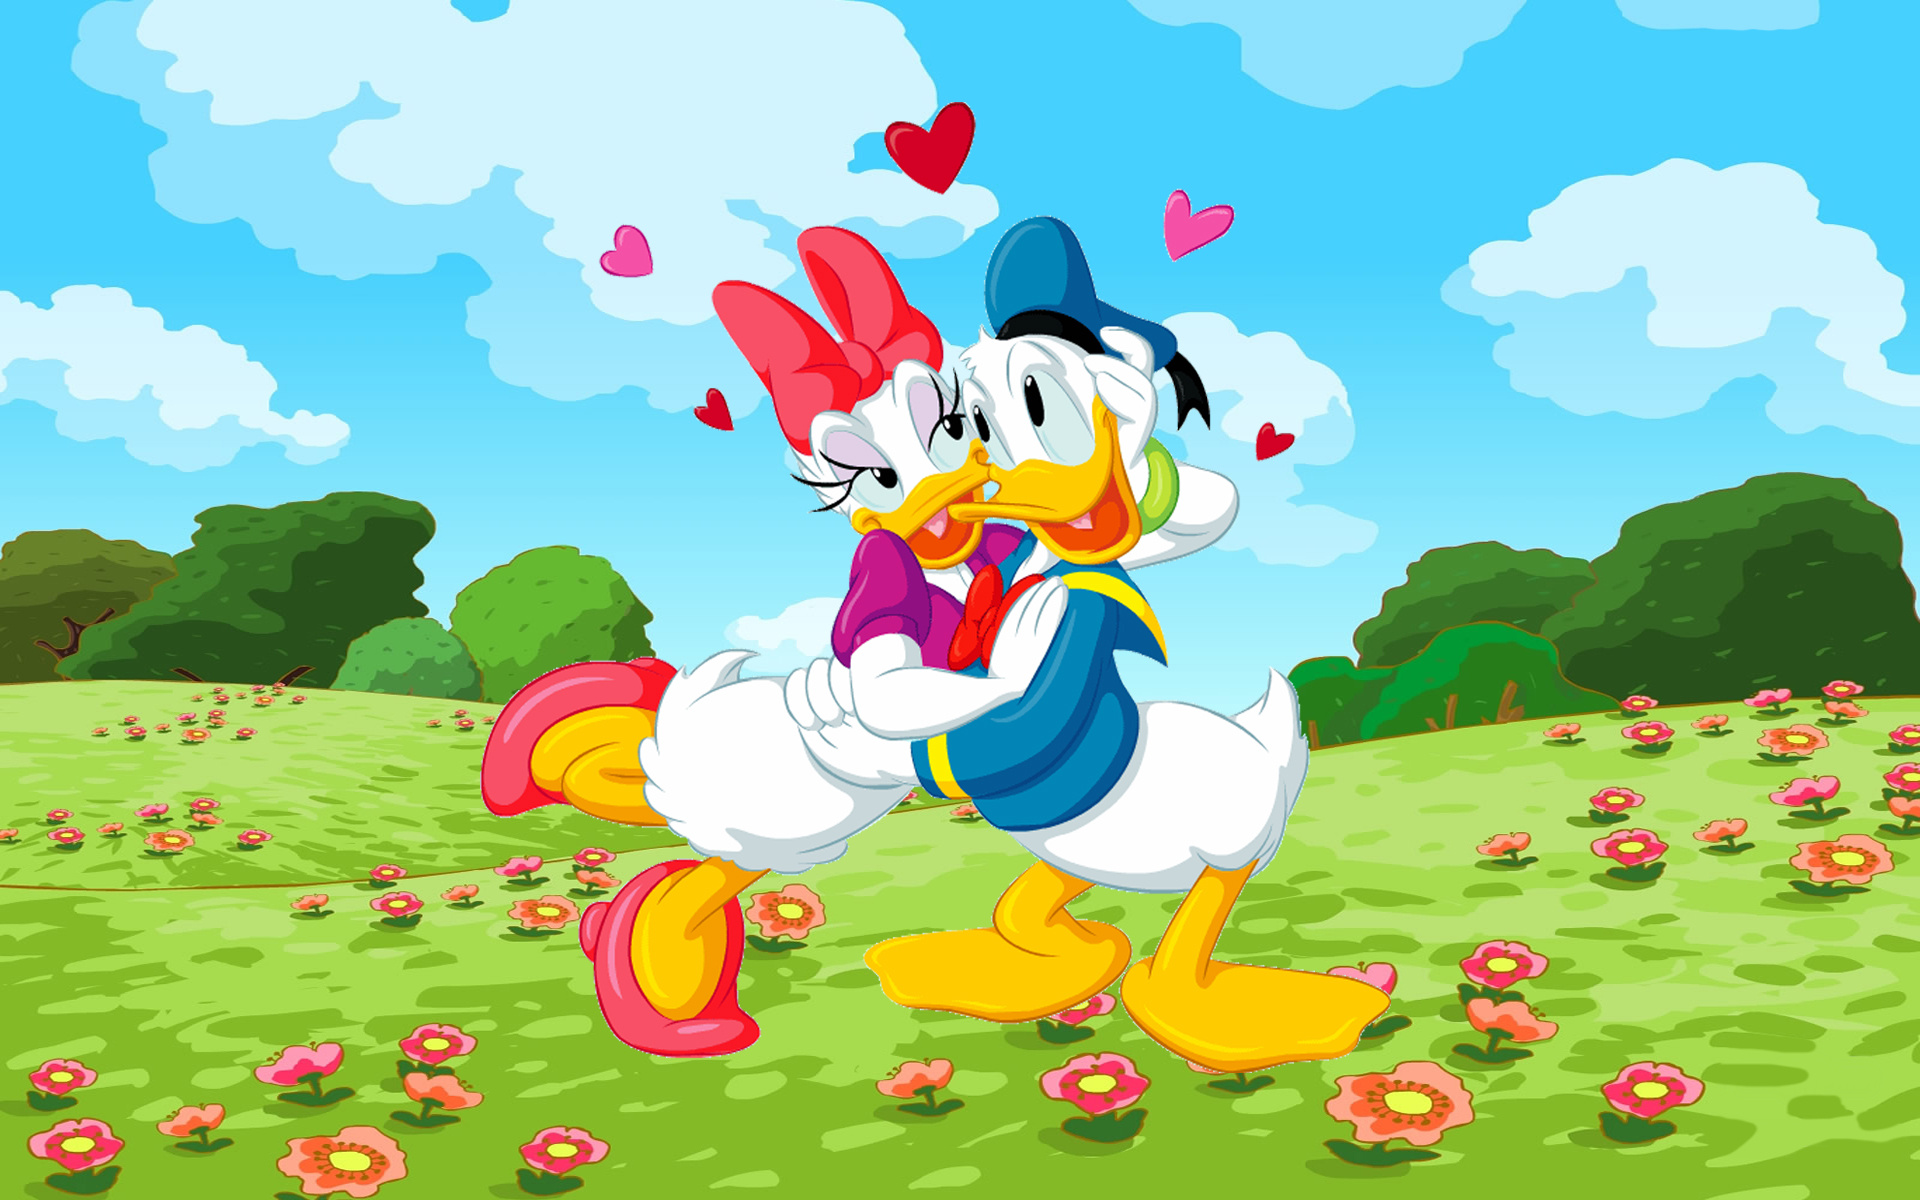 Donald and Daisy Duck wallpapers, HQ, Backgrounds, 1920x1200 HD Desktop